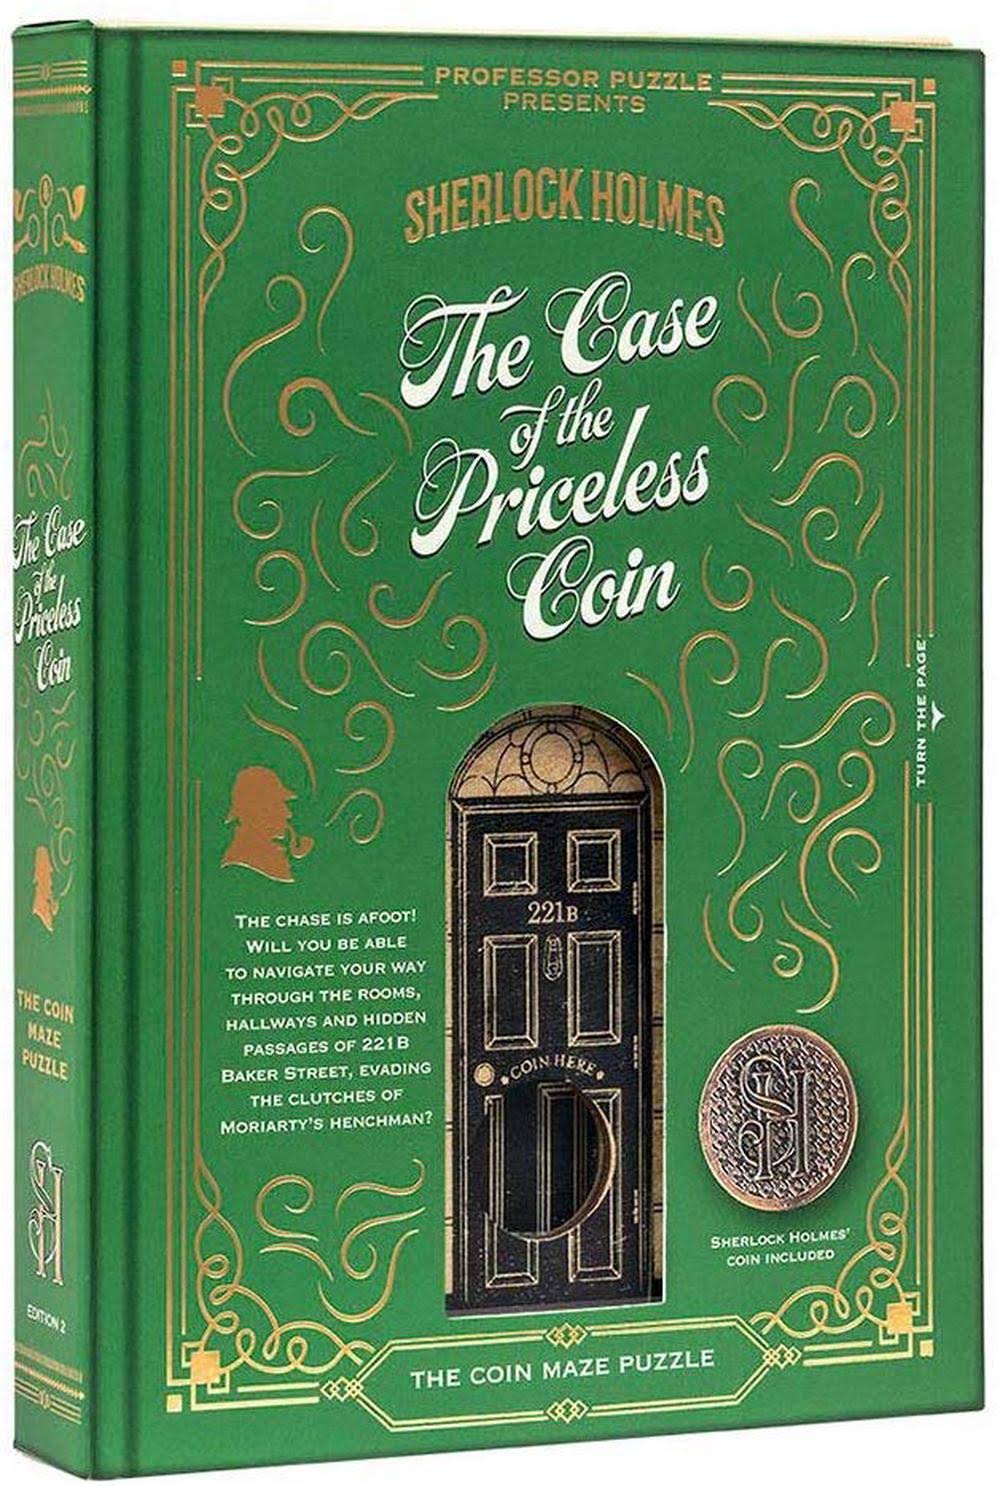 Sherlock Holmes The Case of The Priceless Coin